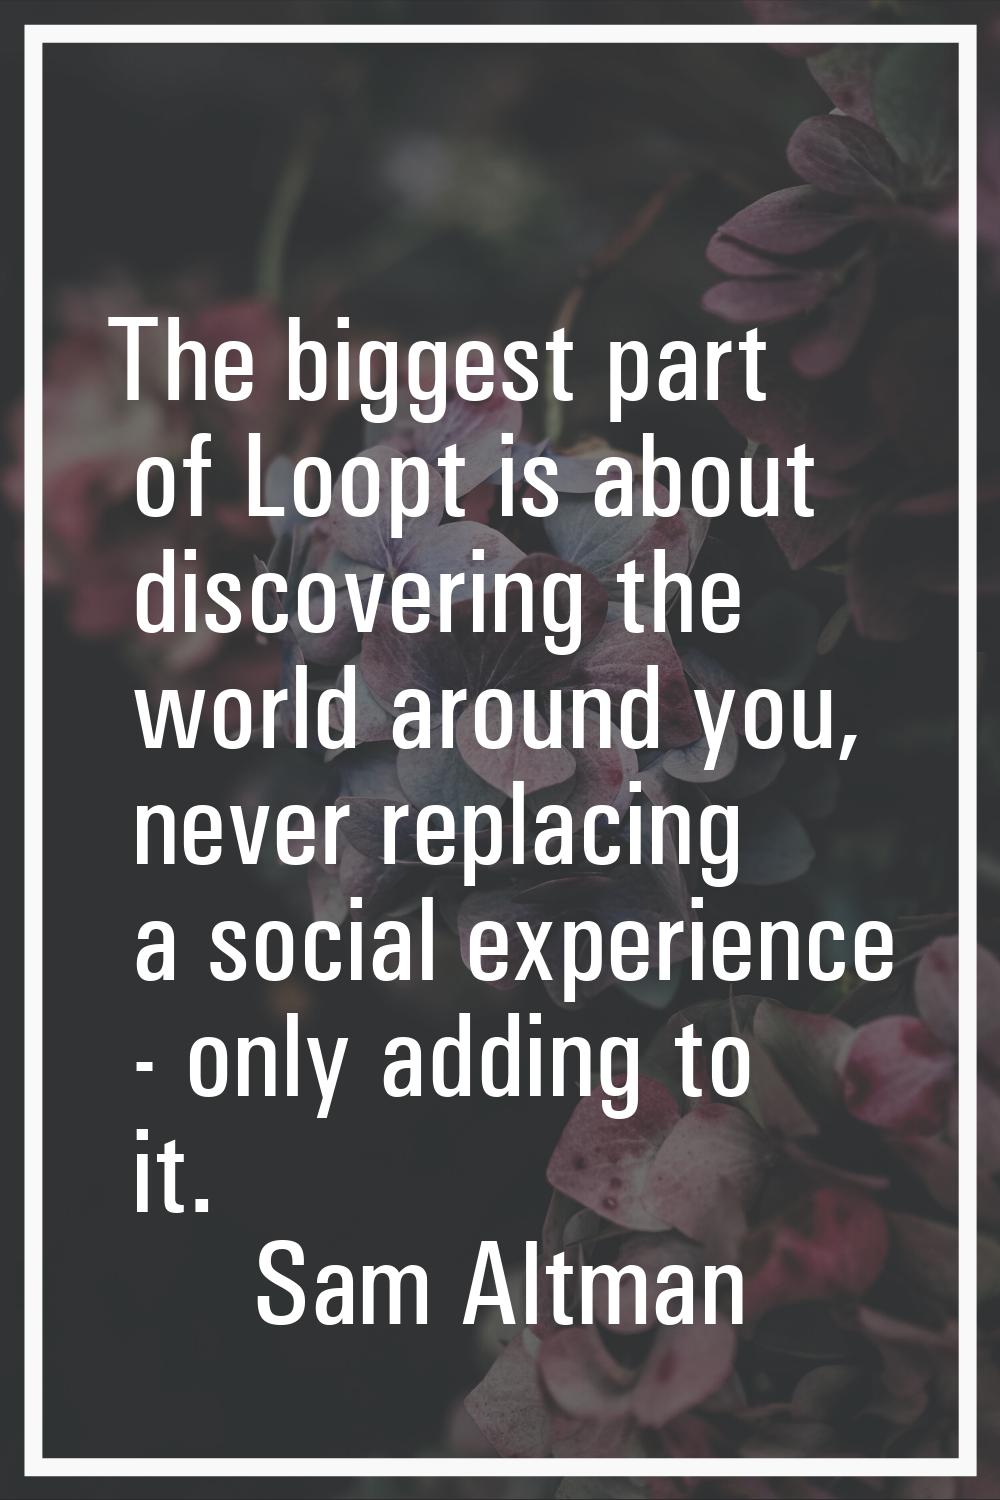 The biggest part of Loopt is about discovering the world around you, never replacing a social exper